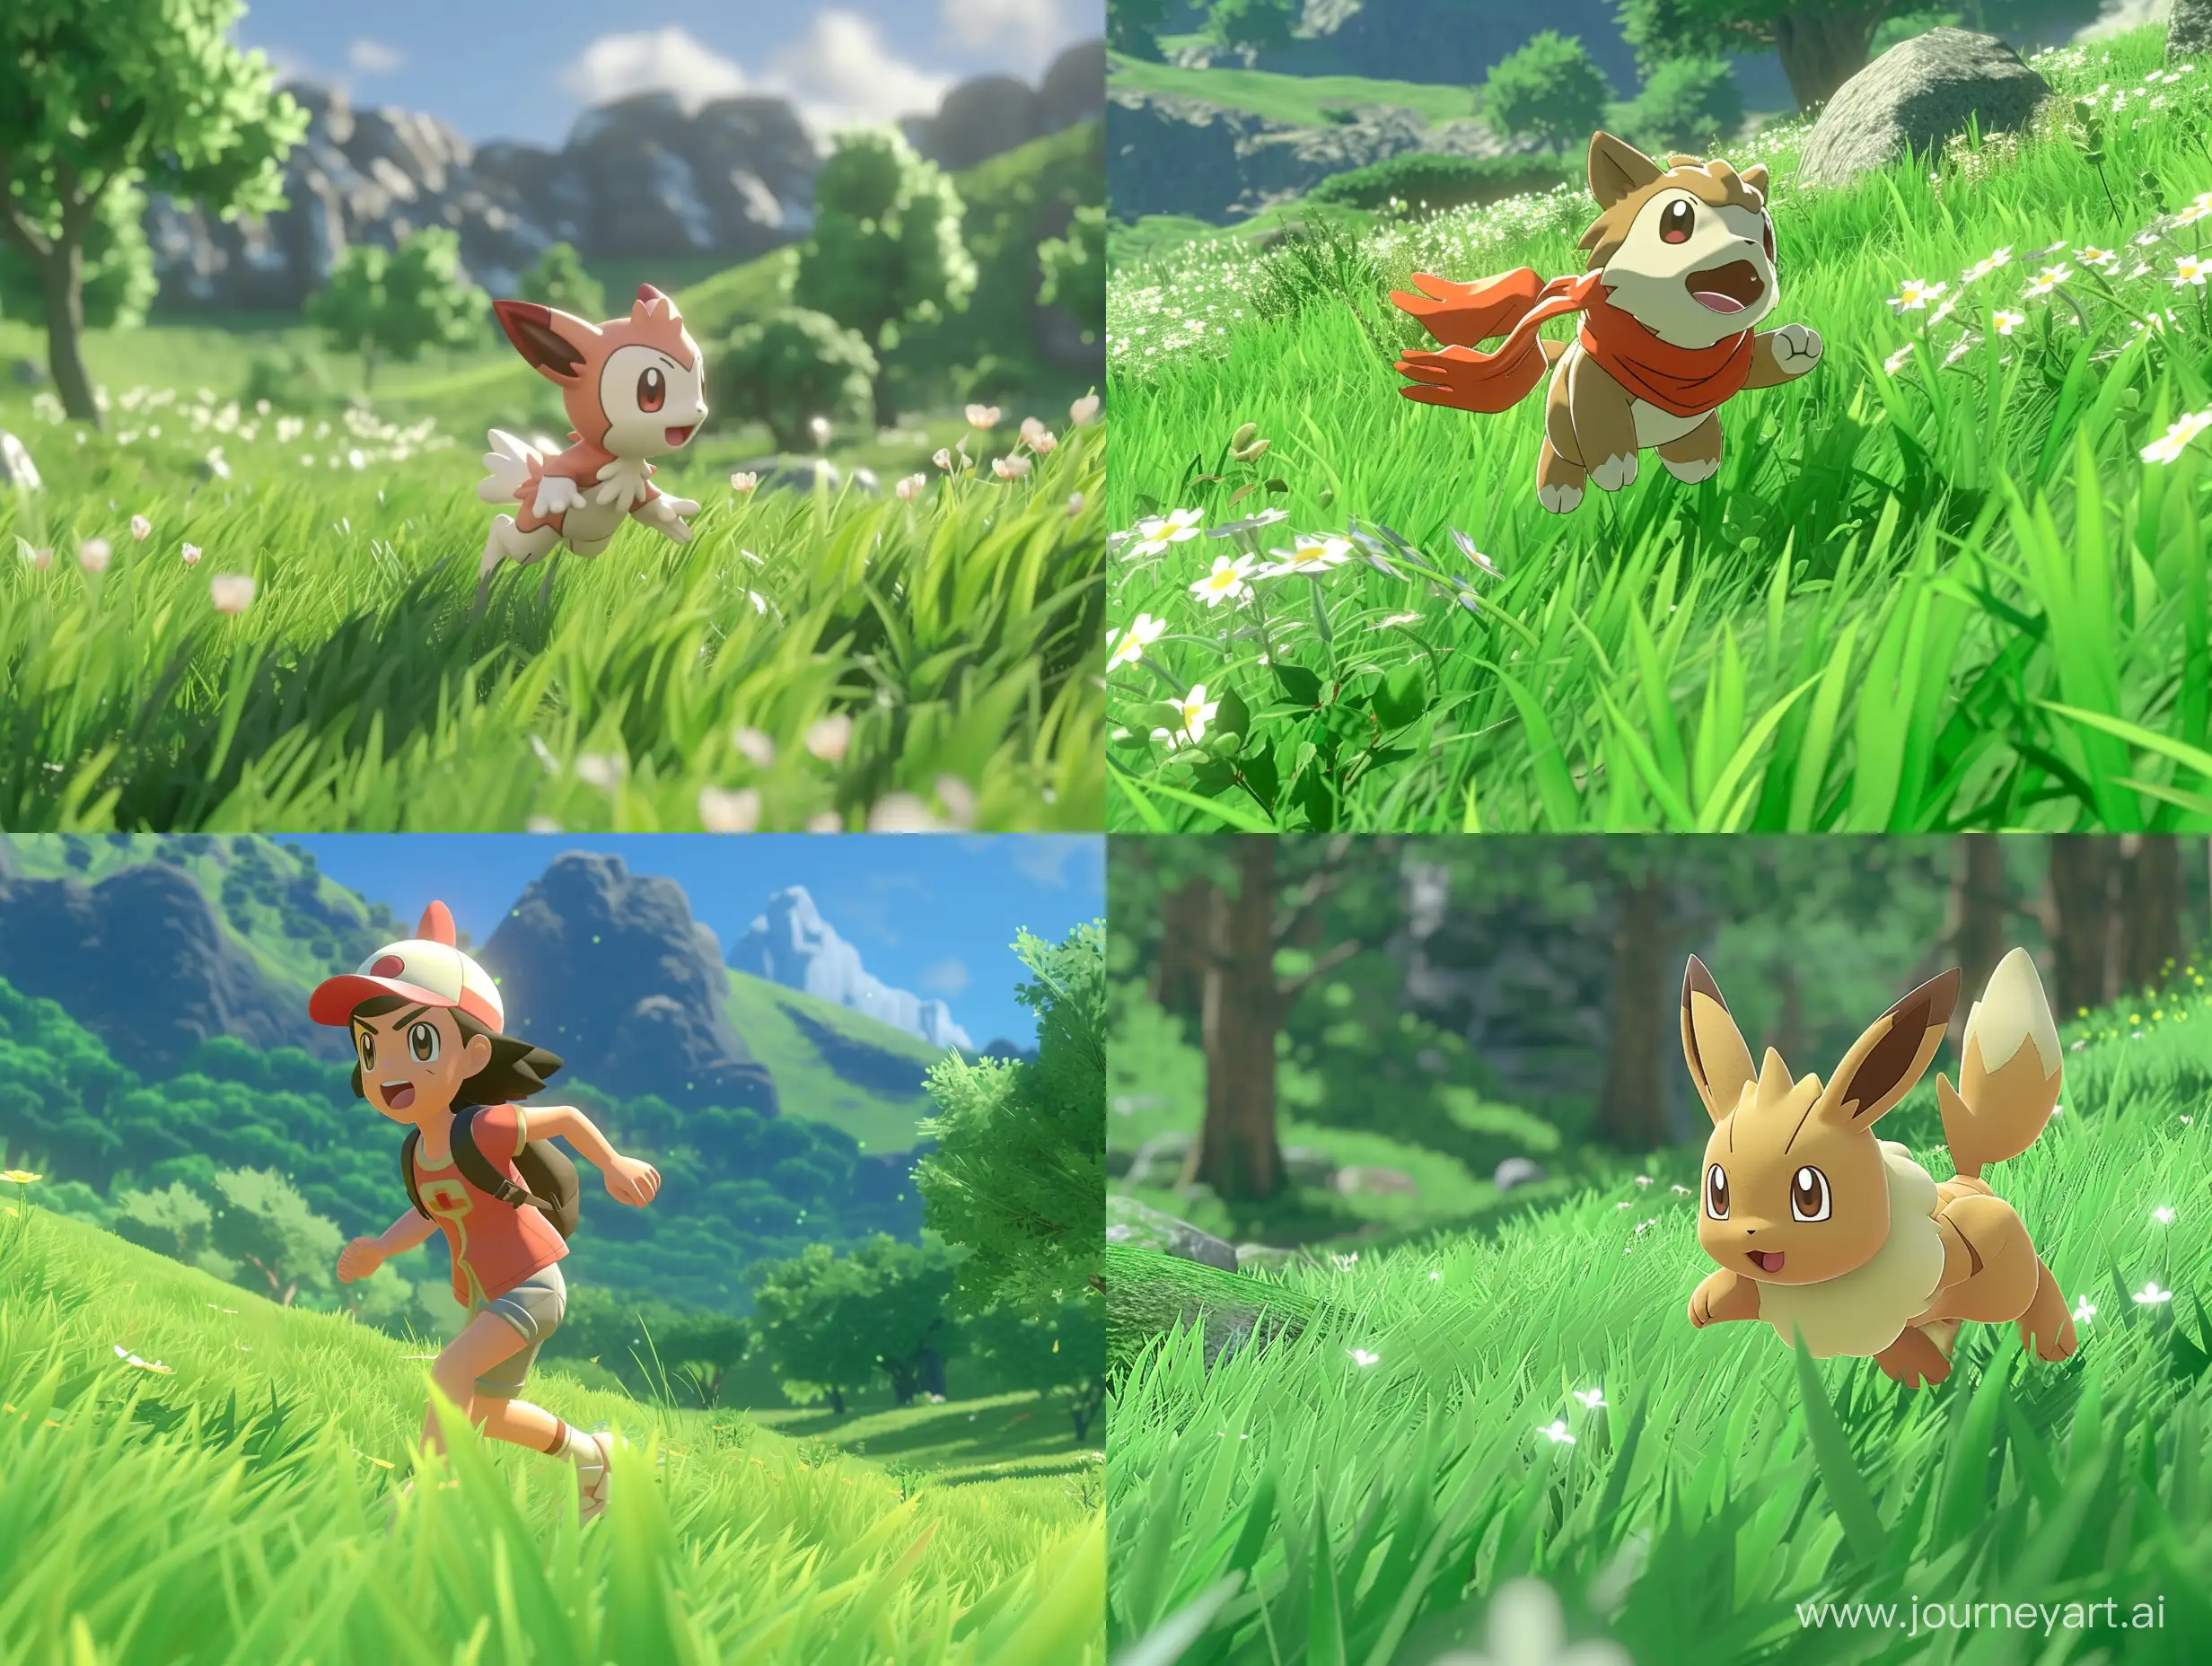 Nintendo-Switch-Game-Screenshot-Animated-Character-Running-in-Vibrant-Grass